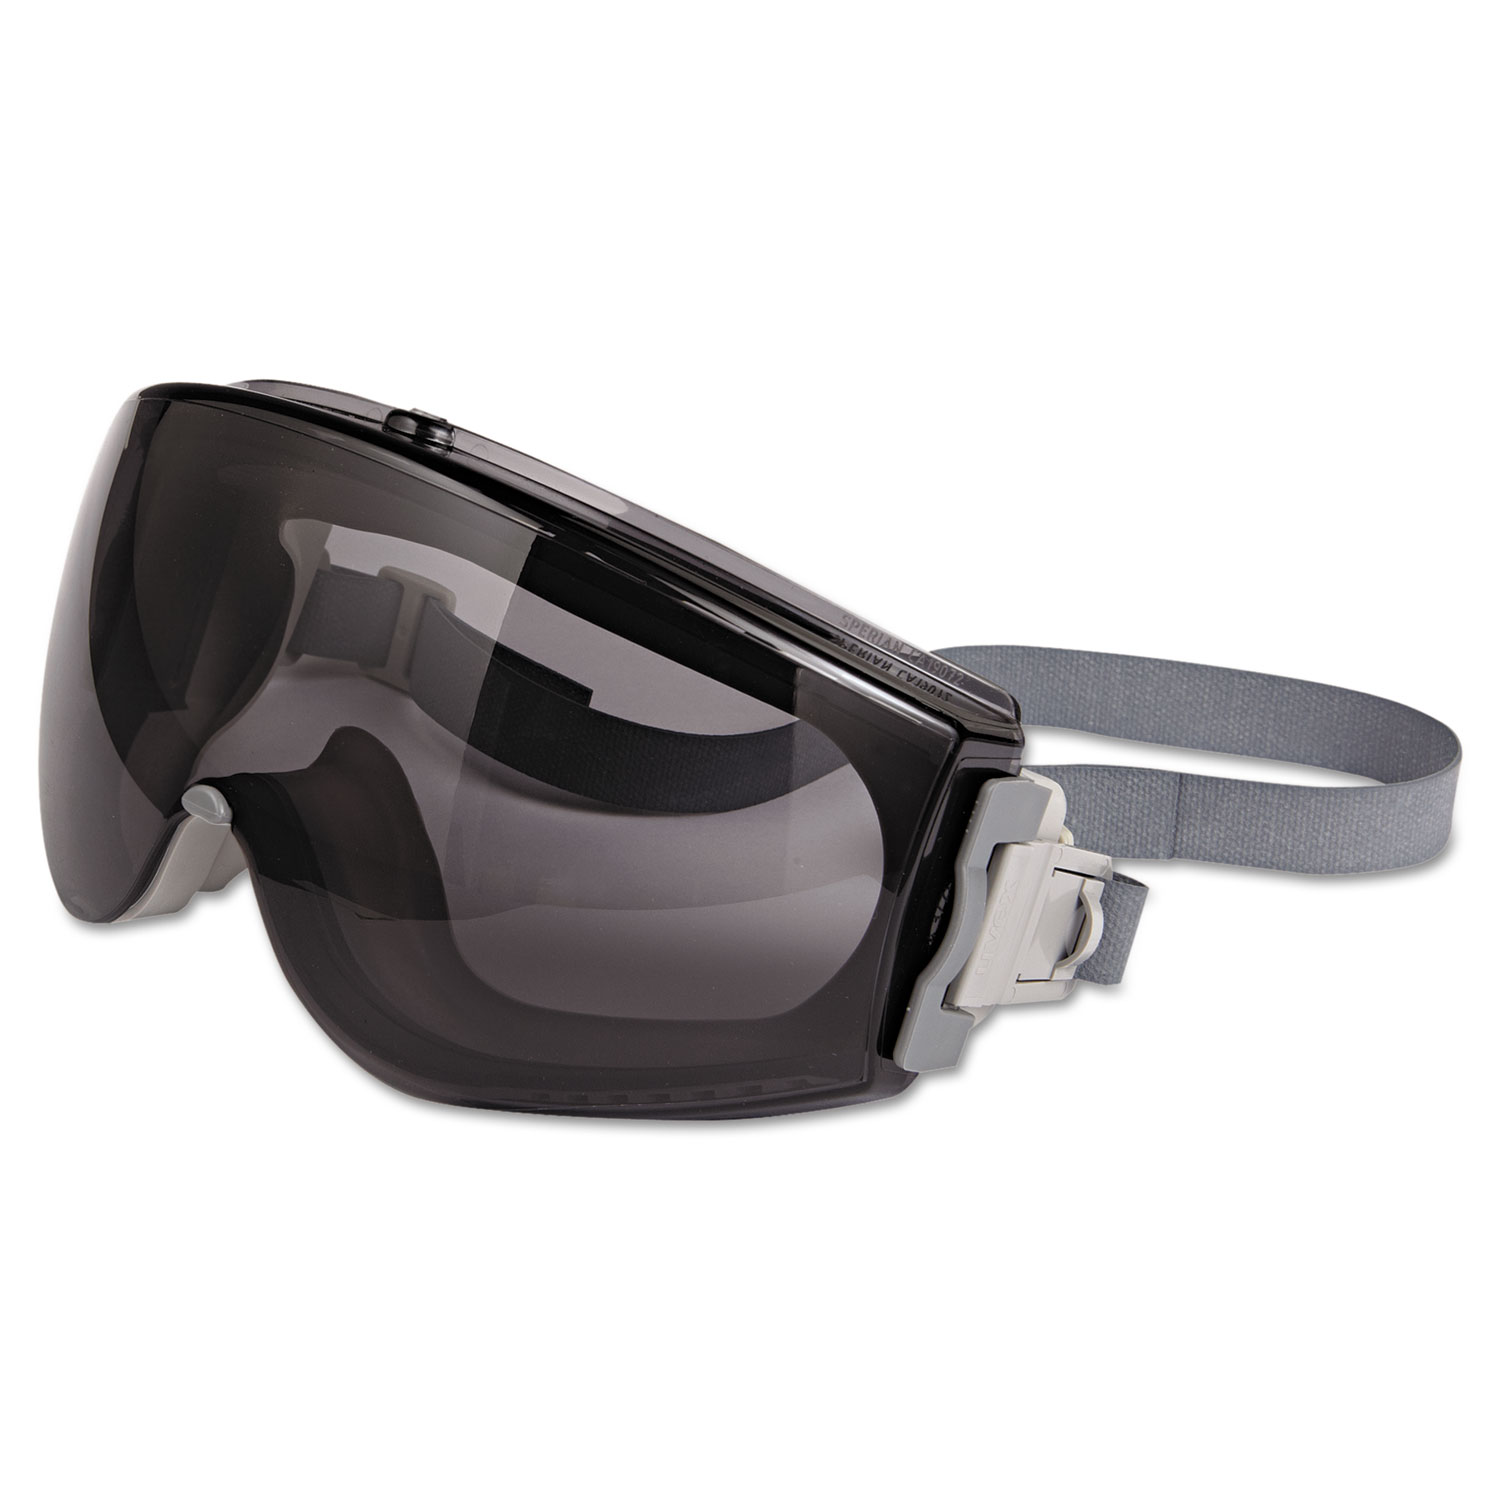 Stealth Safety Goggles, Gray/Gray